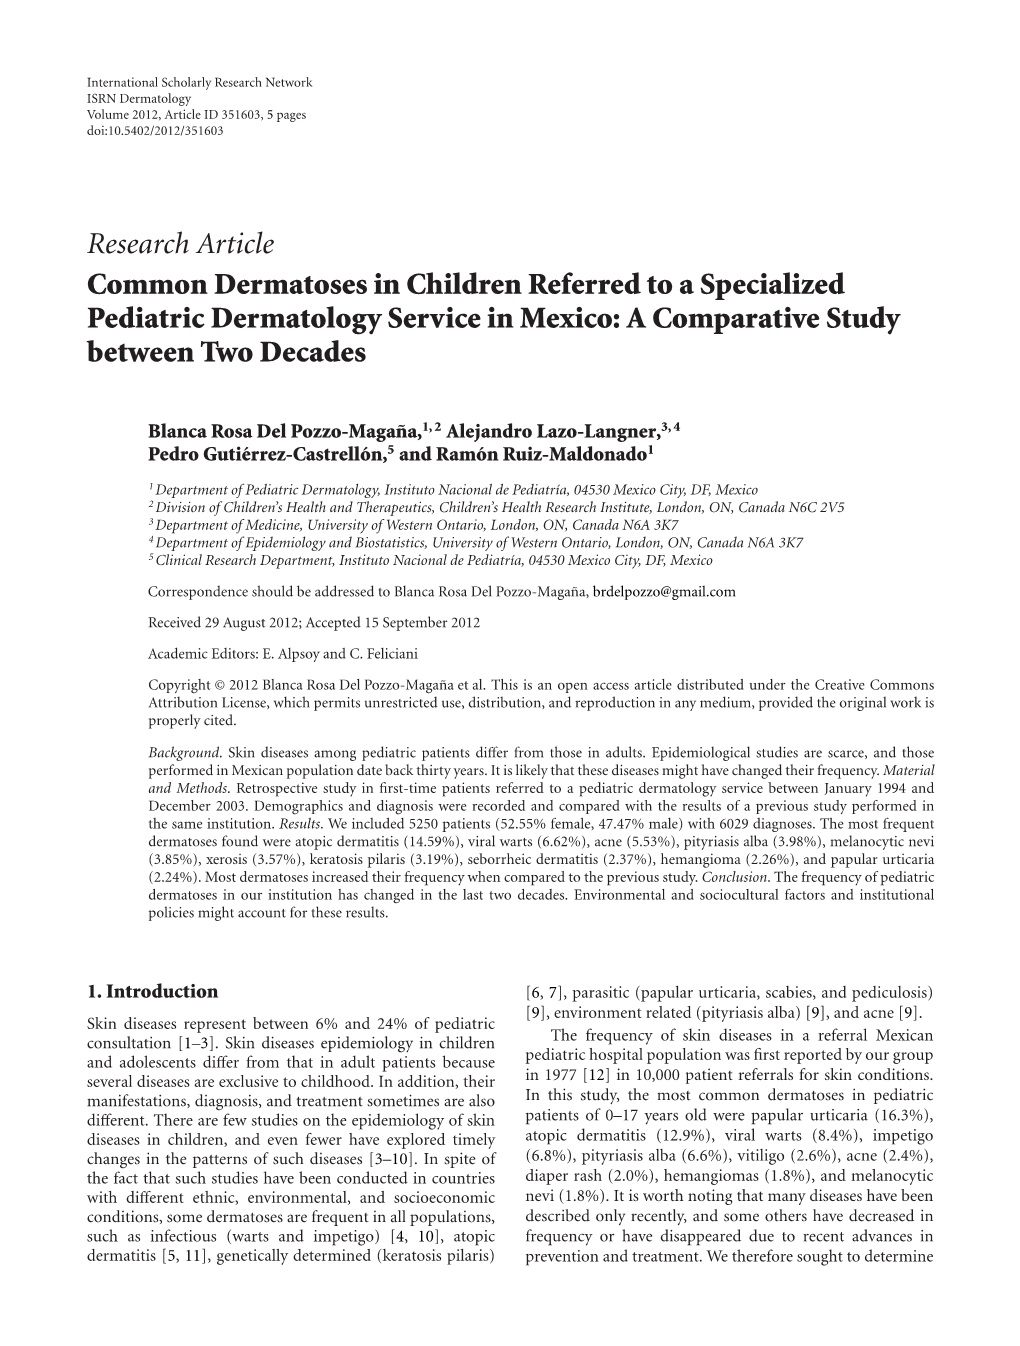 Common Dermatoses in Children Referred to a Specialized Pediatric Dermatology Service in Mexico: a Comparative Study Between Two Decades